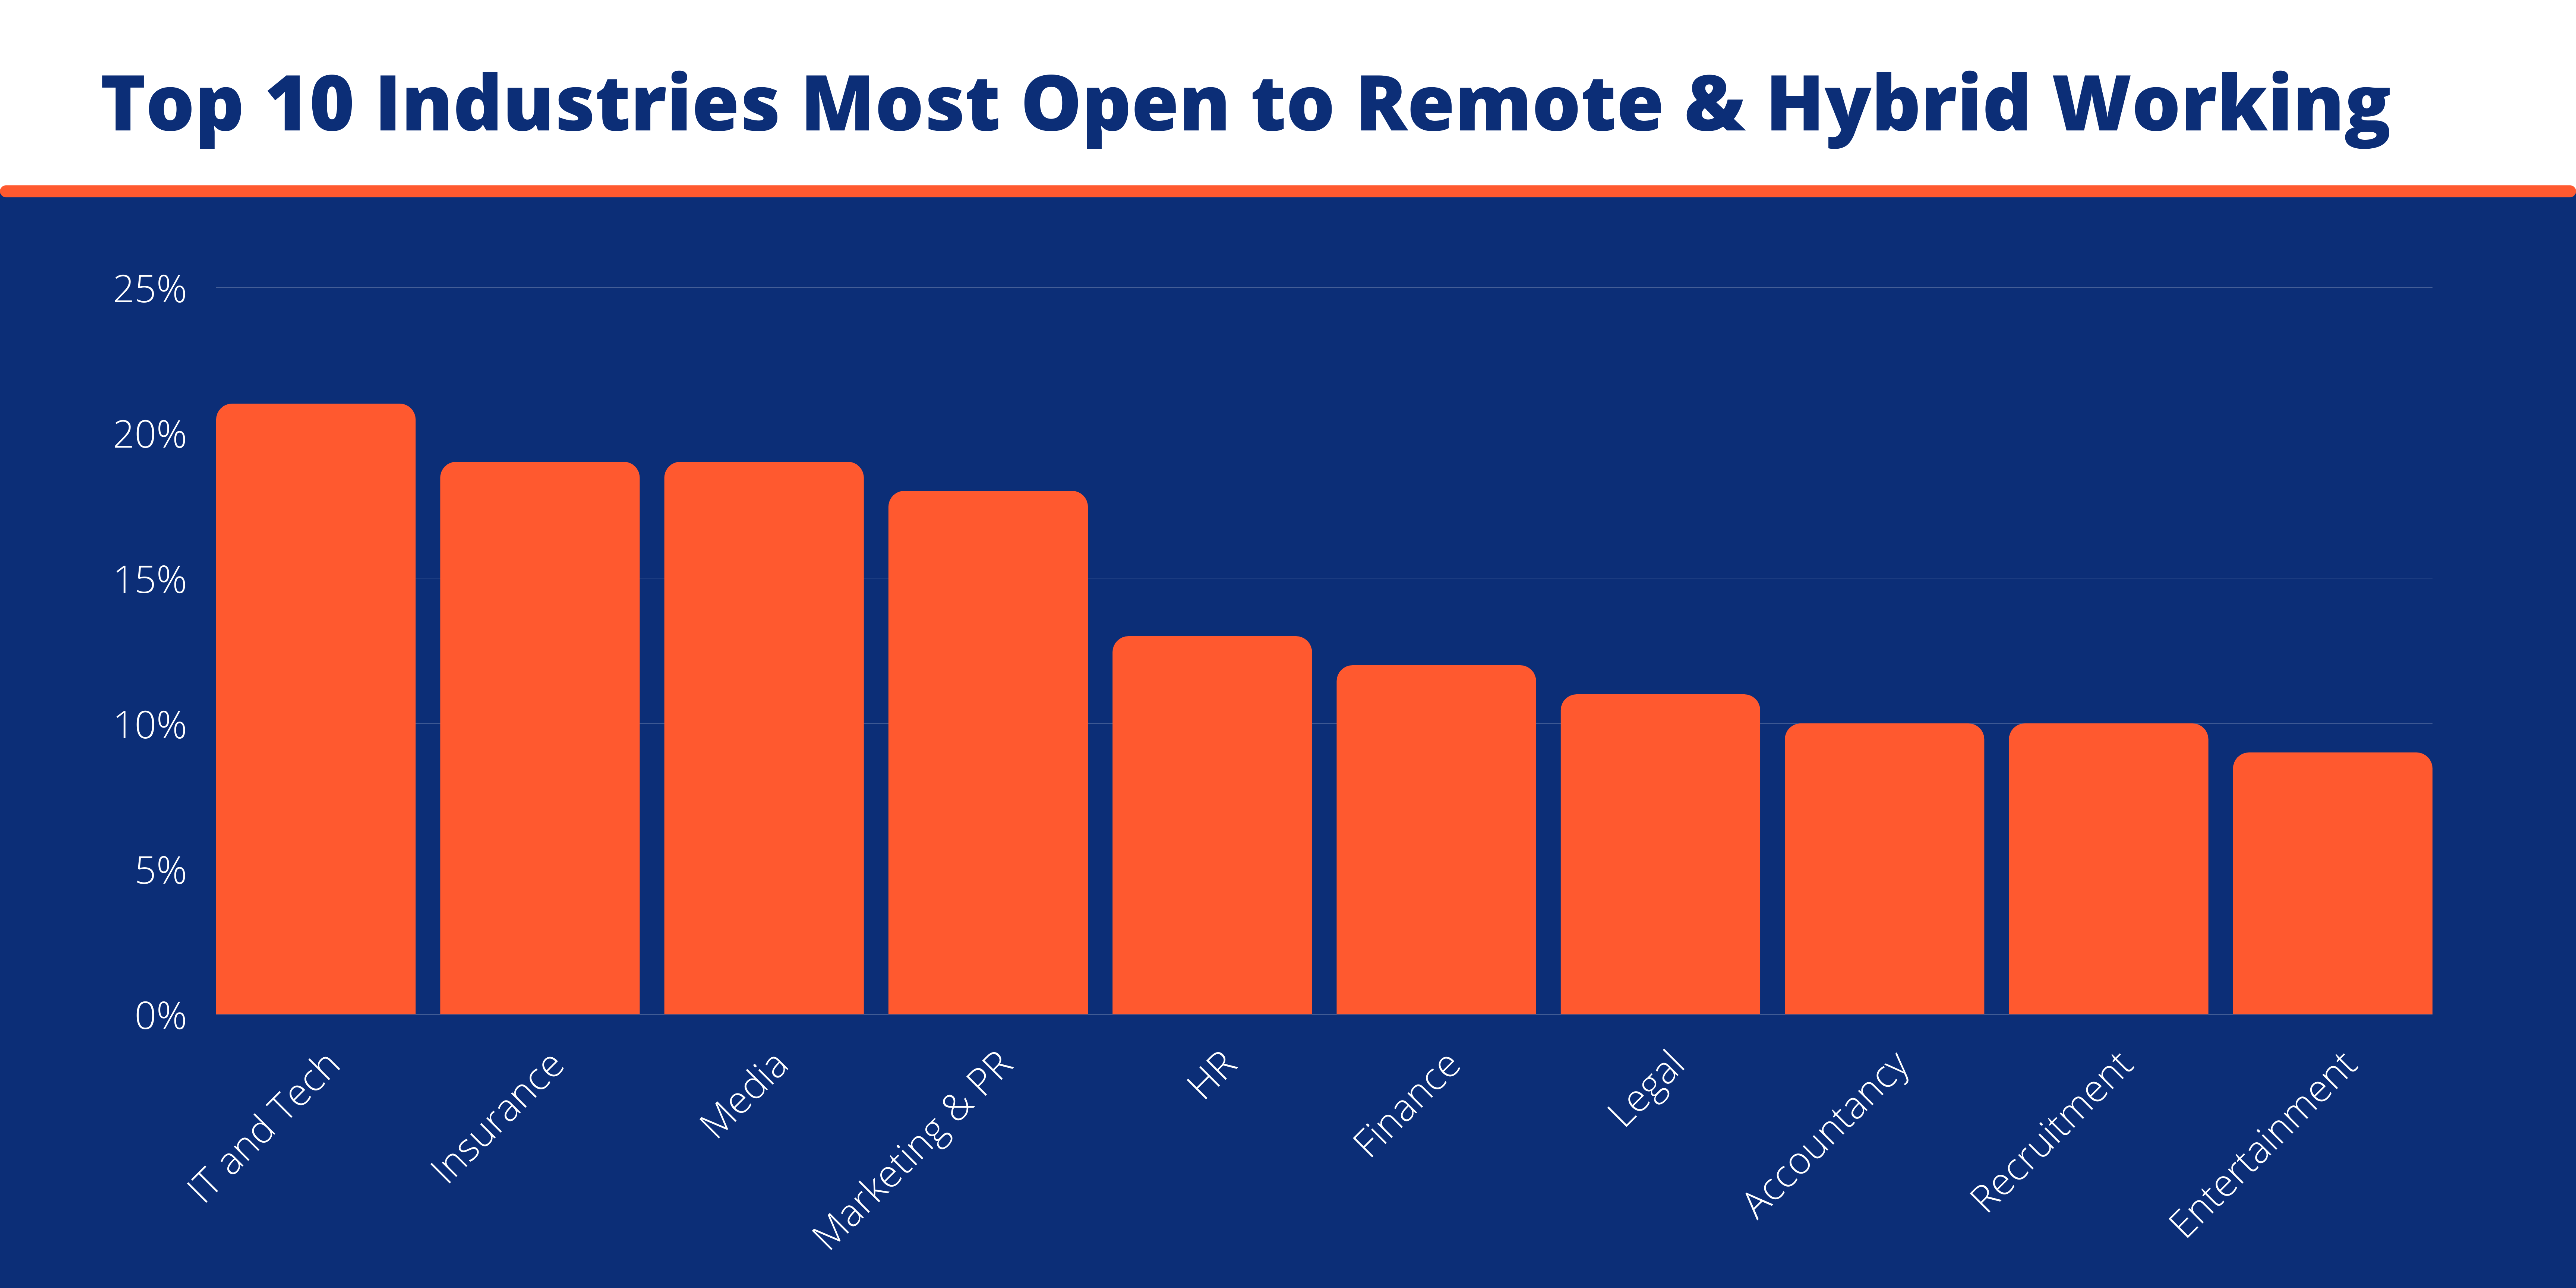 Graph showing the top 10 industries open to remote and hybrid working